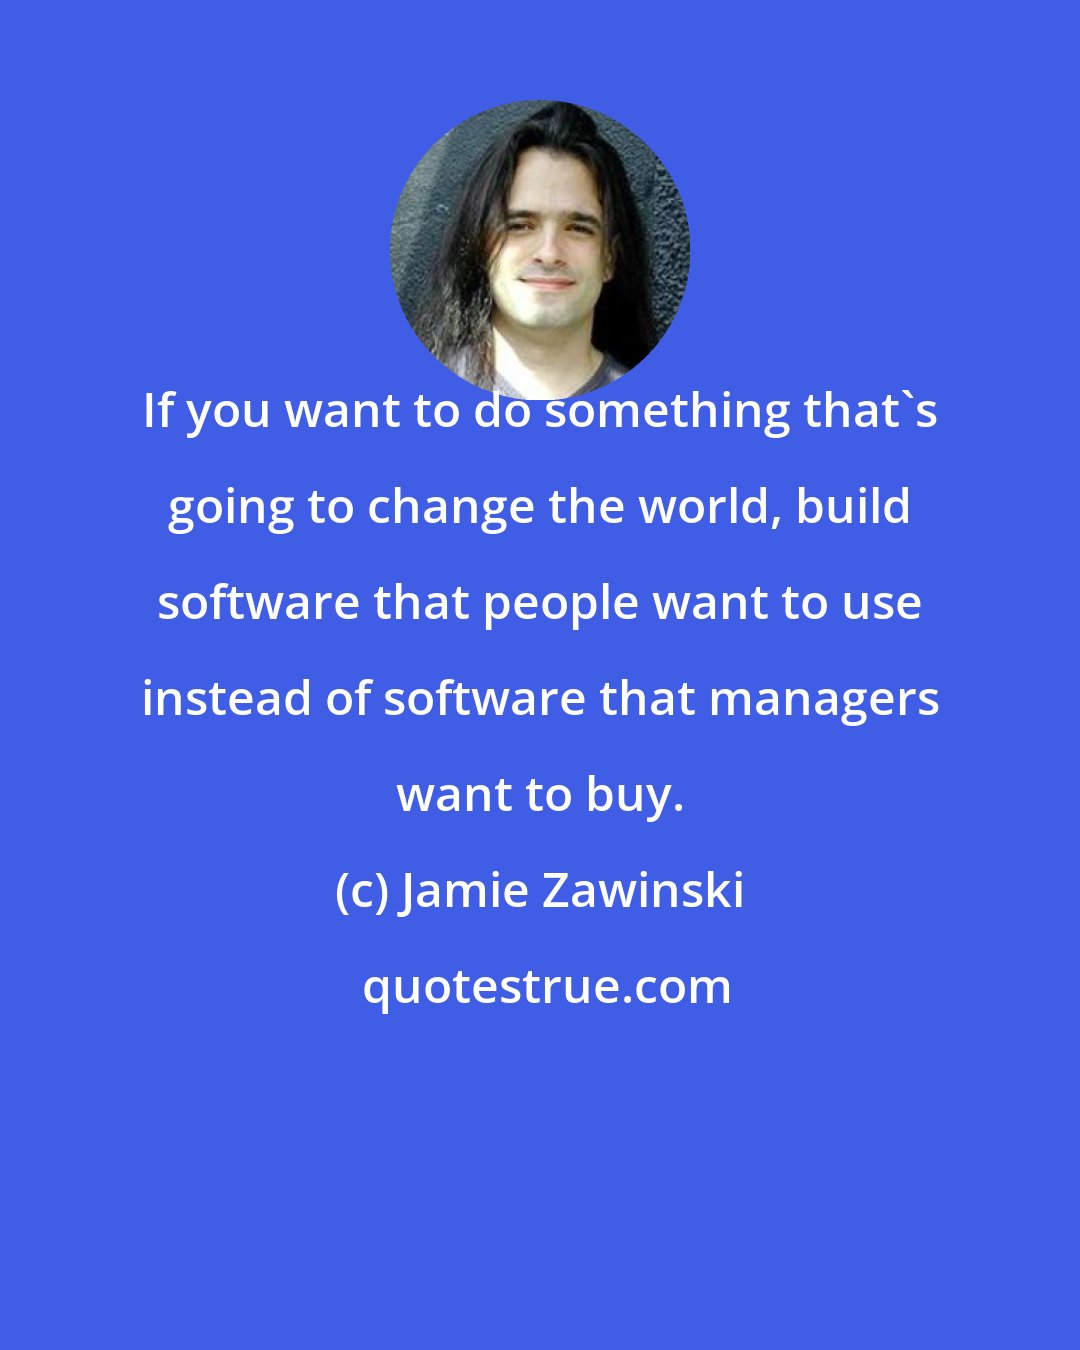 Jamie Zawinski: If you want to do something that's going to change the world, build software that people want to use instead of software that managers want to buy.